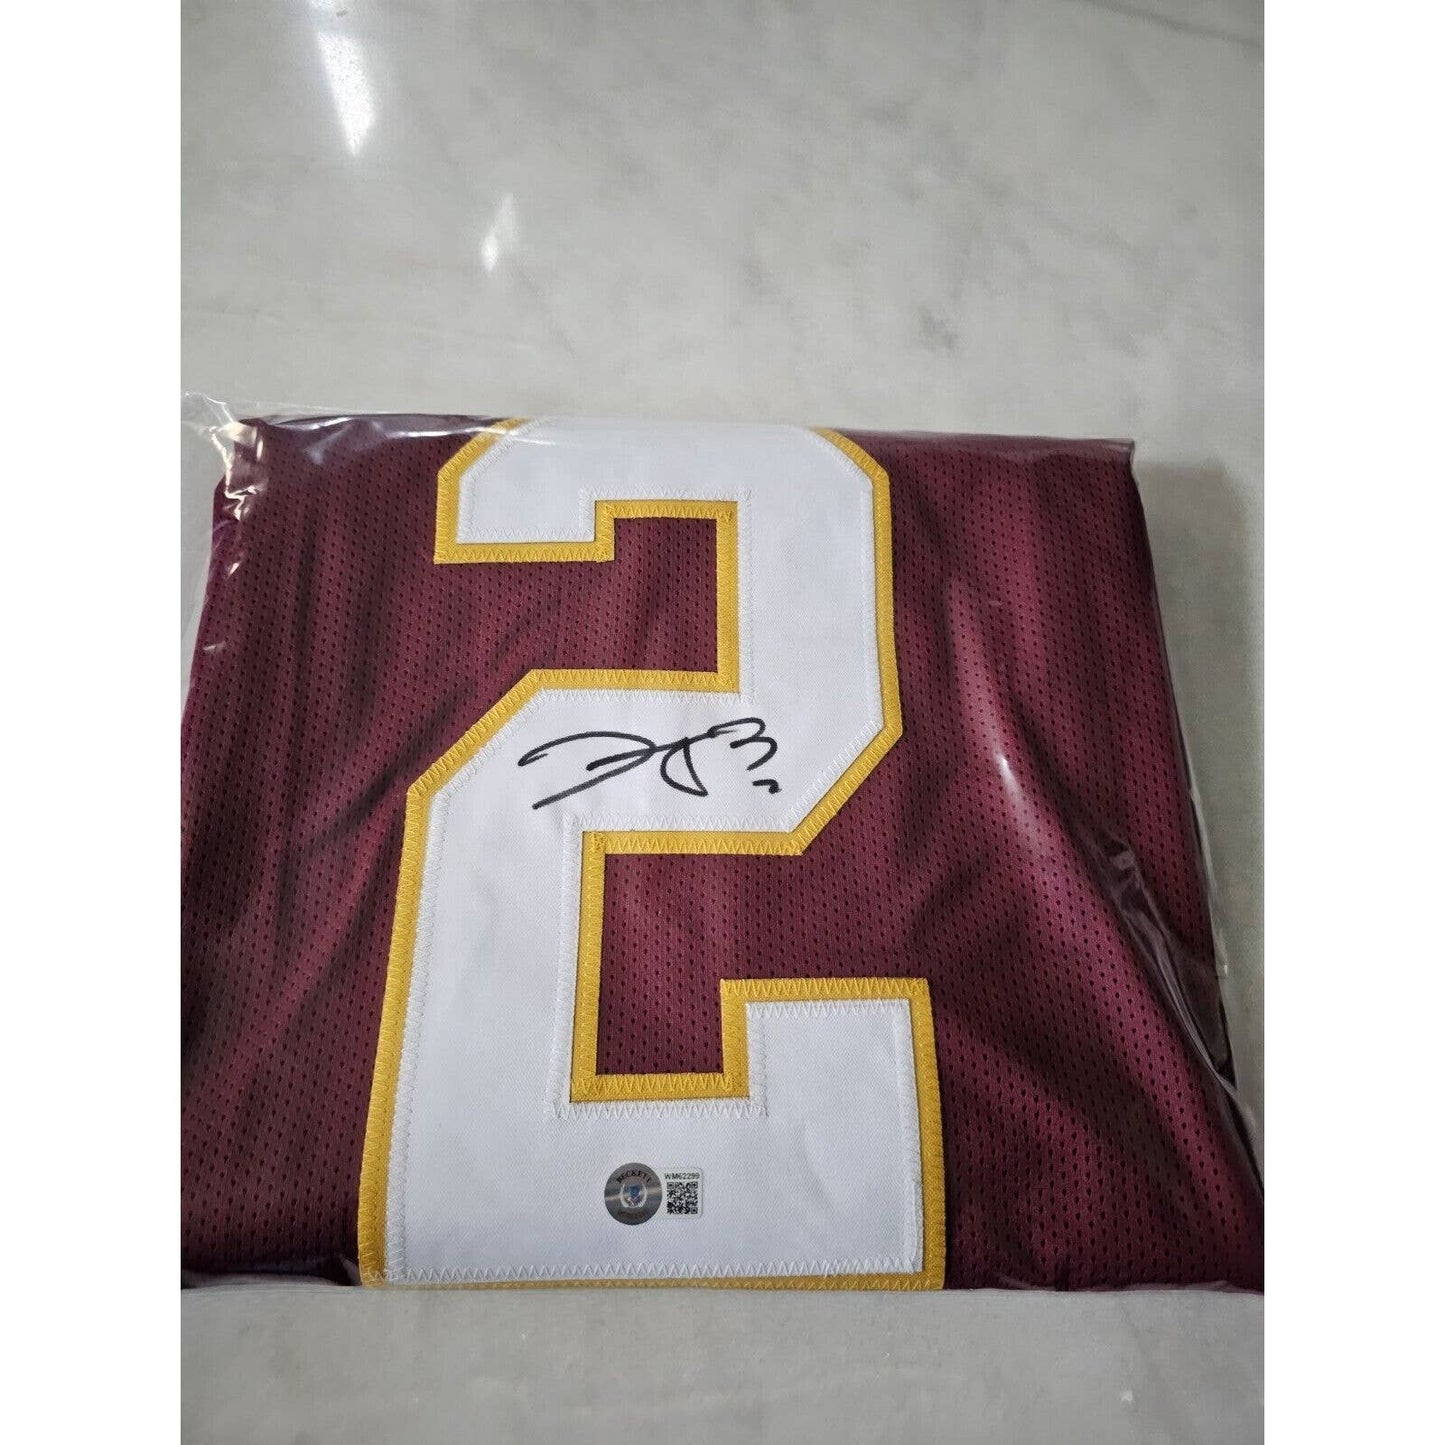 Dyami Brown Autographed/Signed Jersey Beckett Washington Commanders